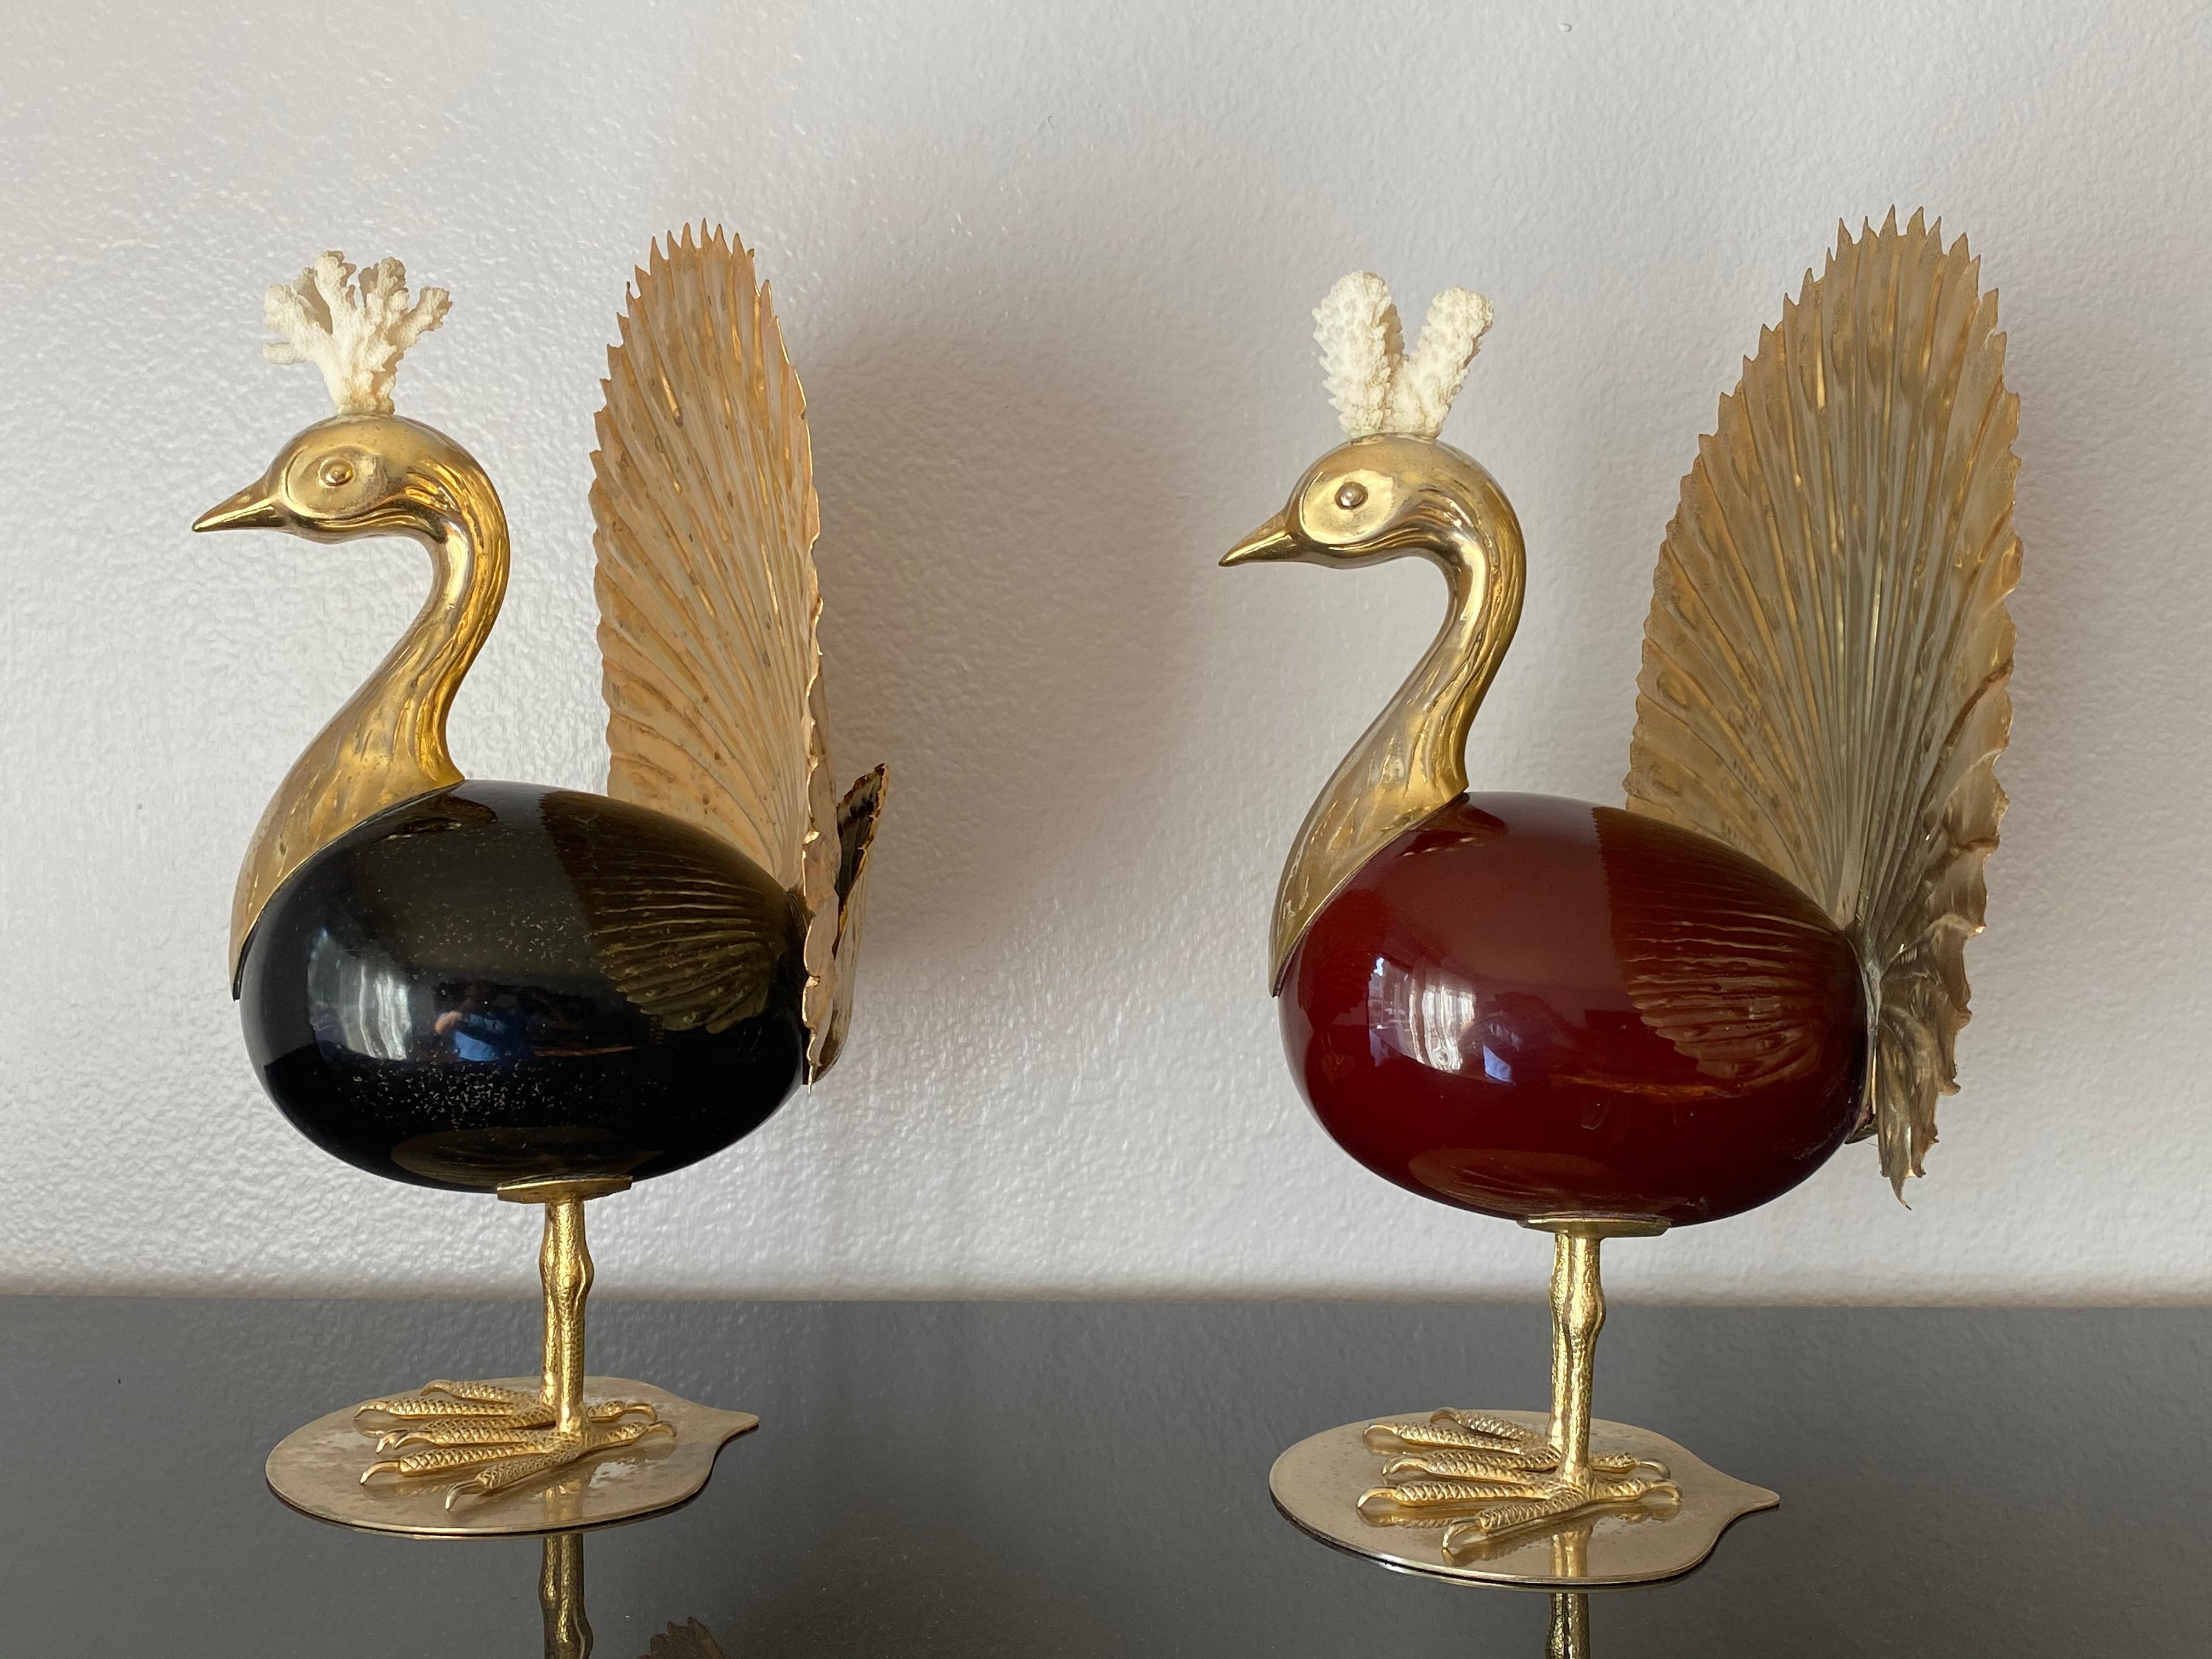 Italian Pair of Antonio Pavia Brass and Coral Peacock Bookends Sculptures